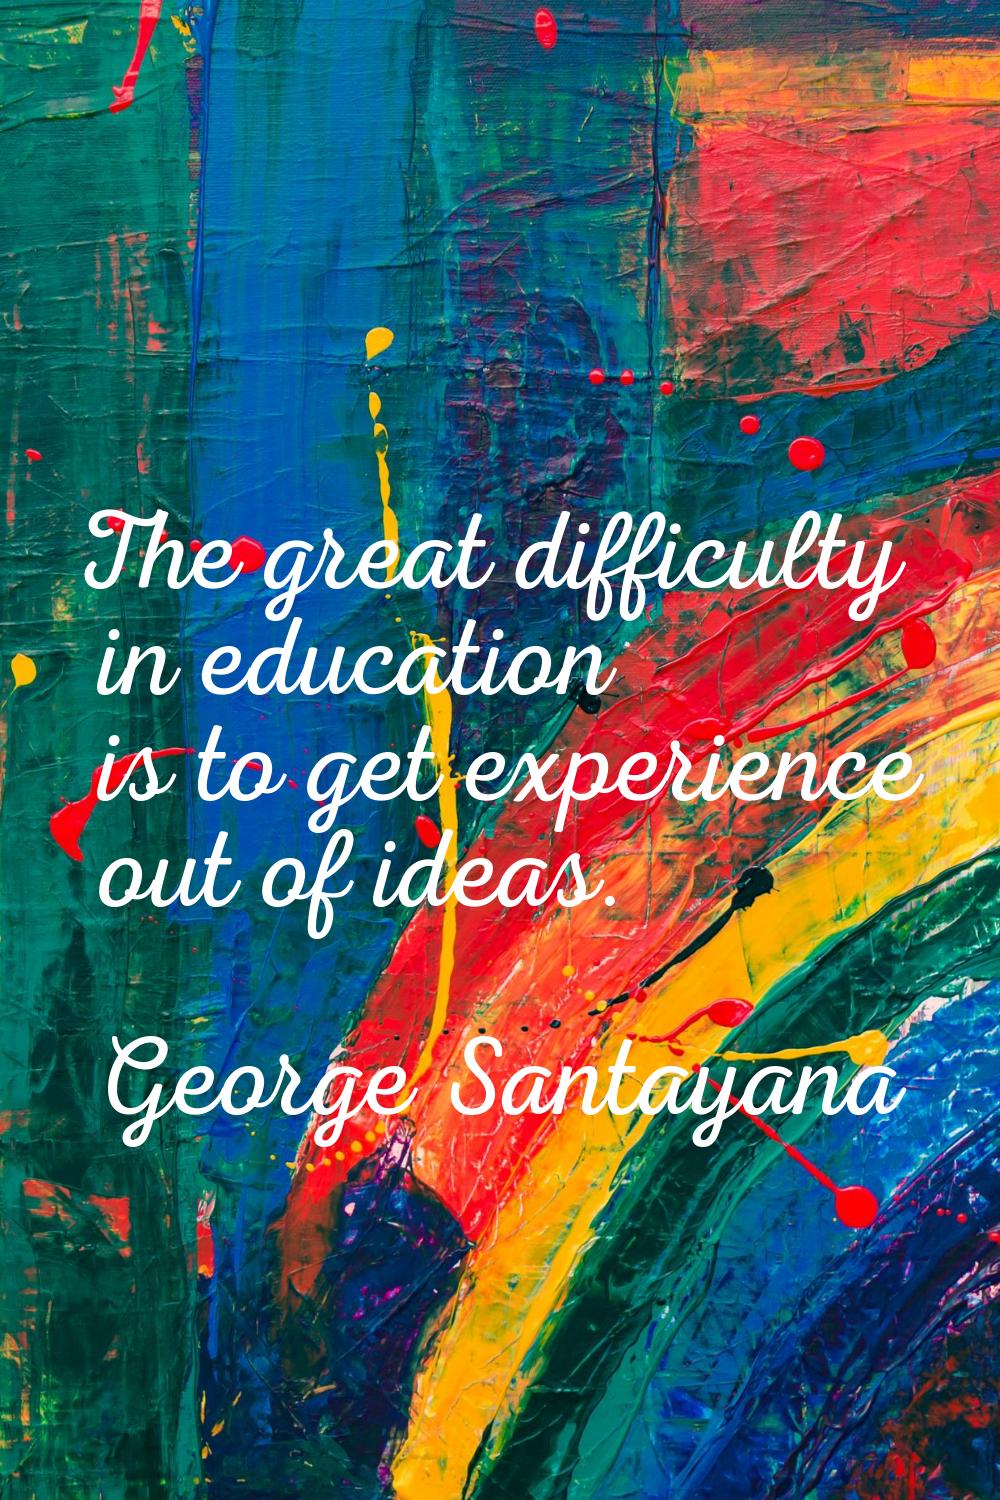 The great difficulty in education is to get experience out of ideas.